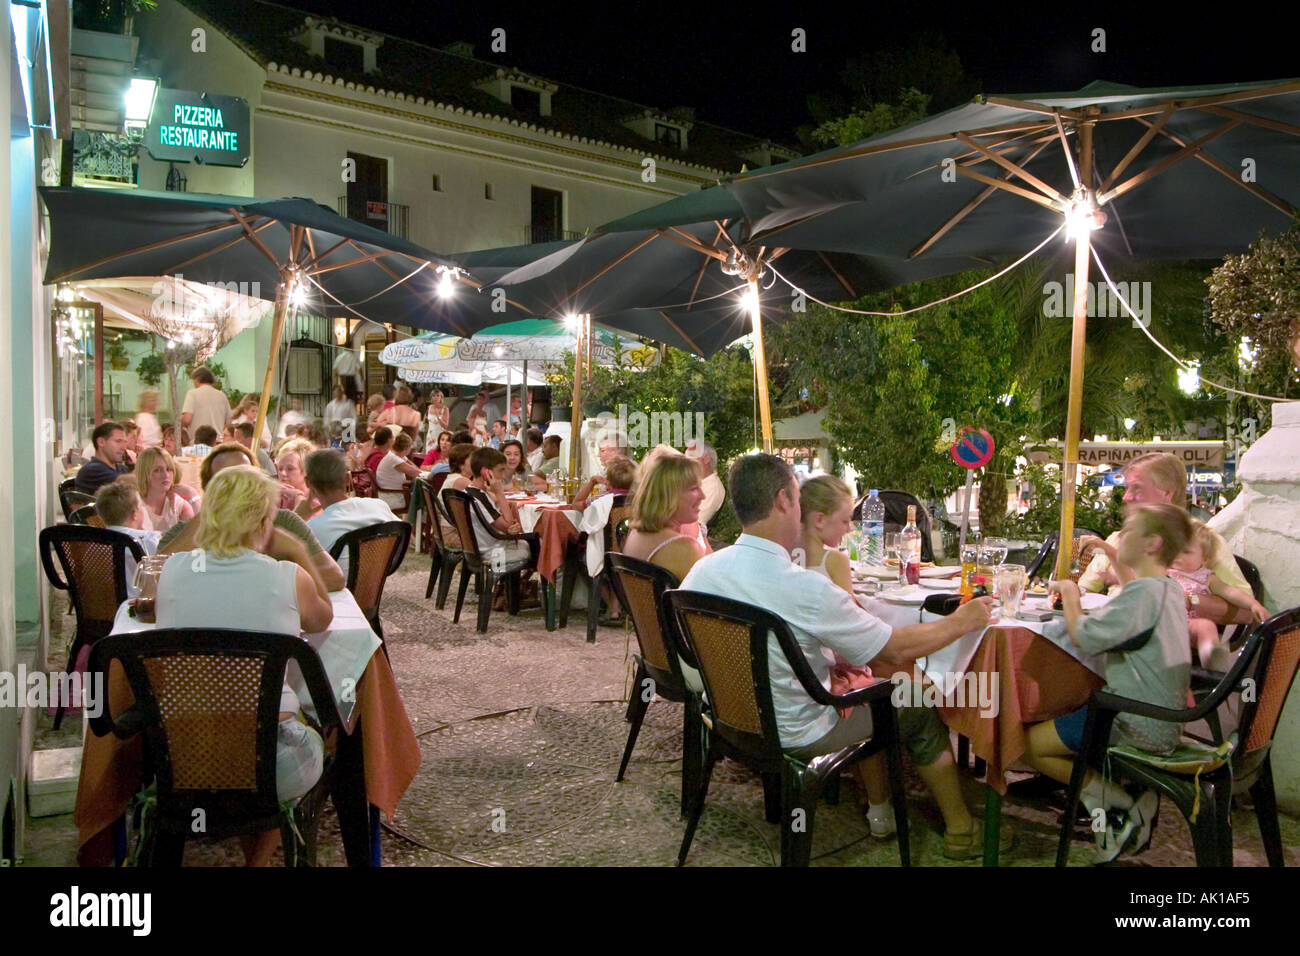 Restaurant at night in the old town, Mijas, Costa del Sol, Andalusia, Spain Stock Photo